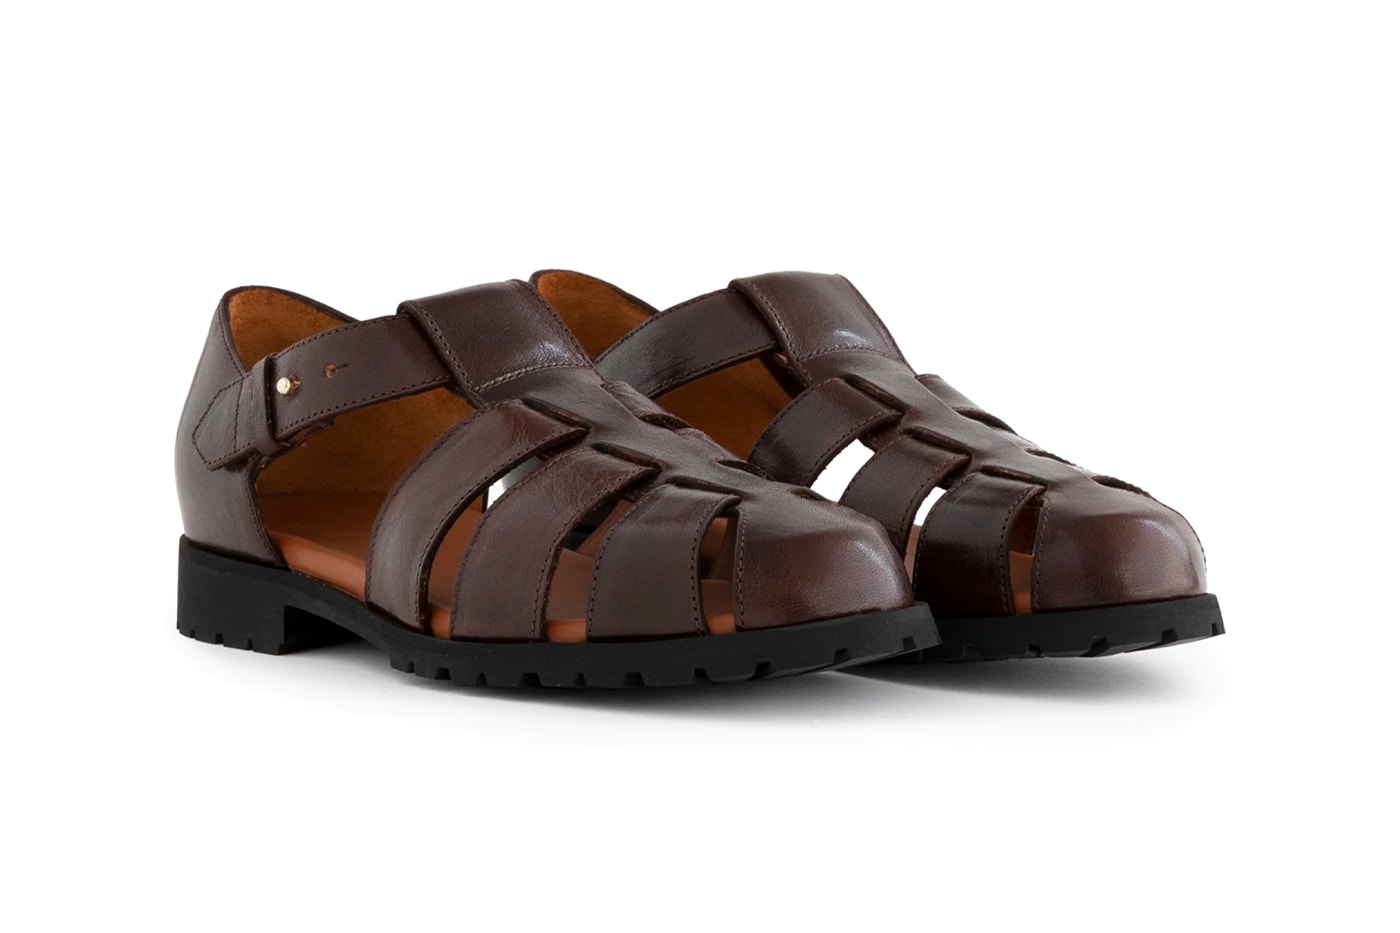 Aime Leon Dore Fisherman Sandal black brown gold brass cow leather calfskin release info date price